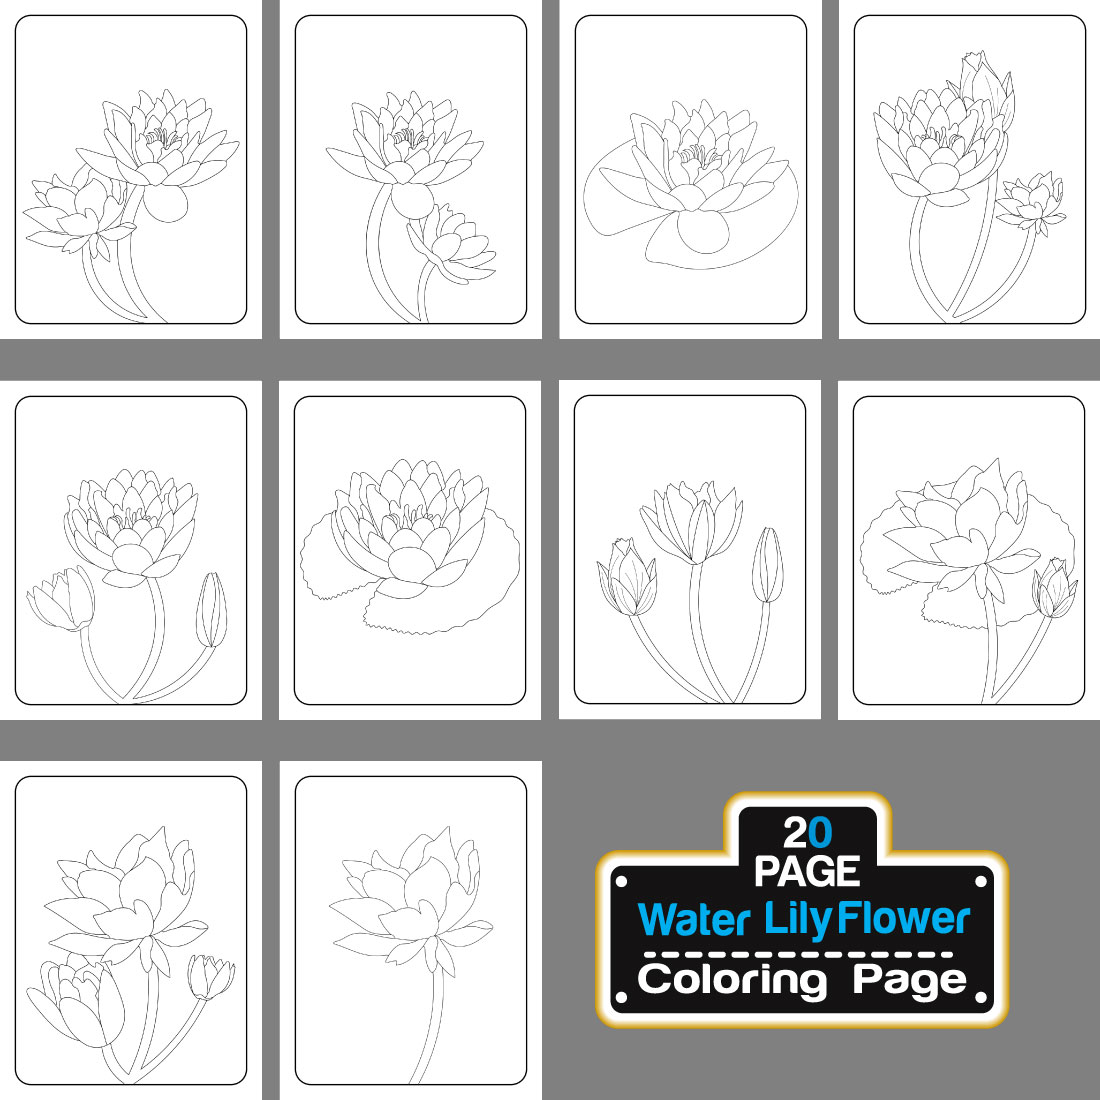 lotus coloring pages